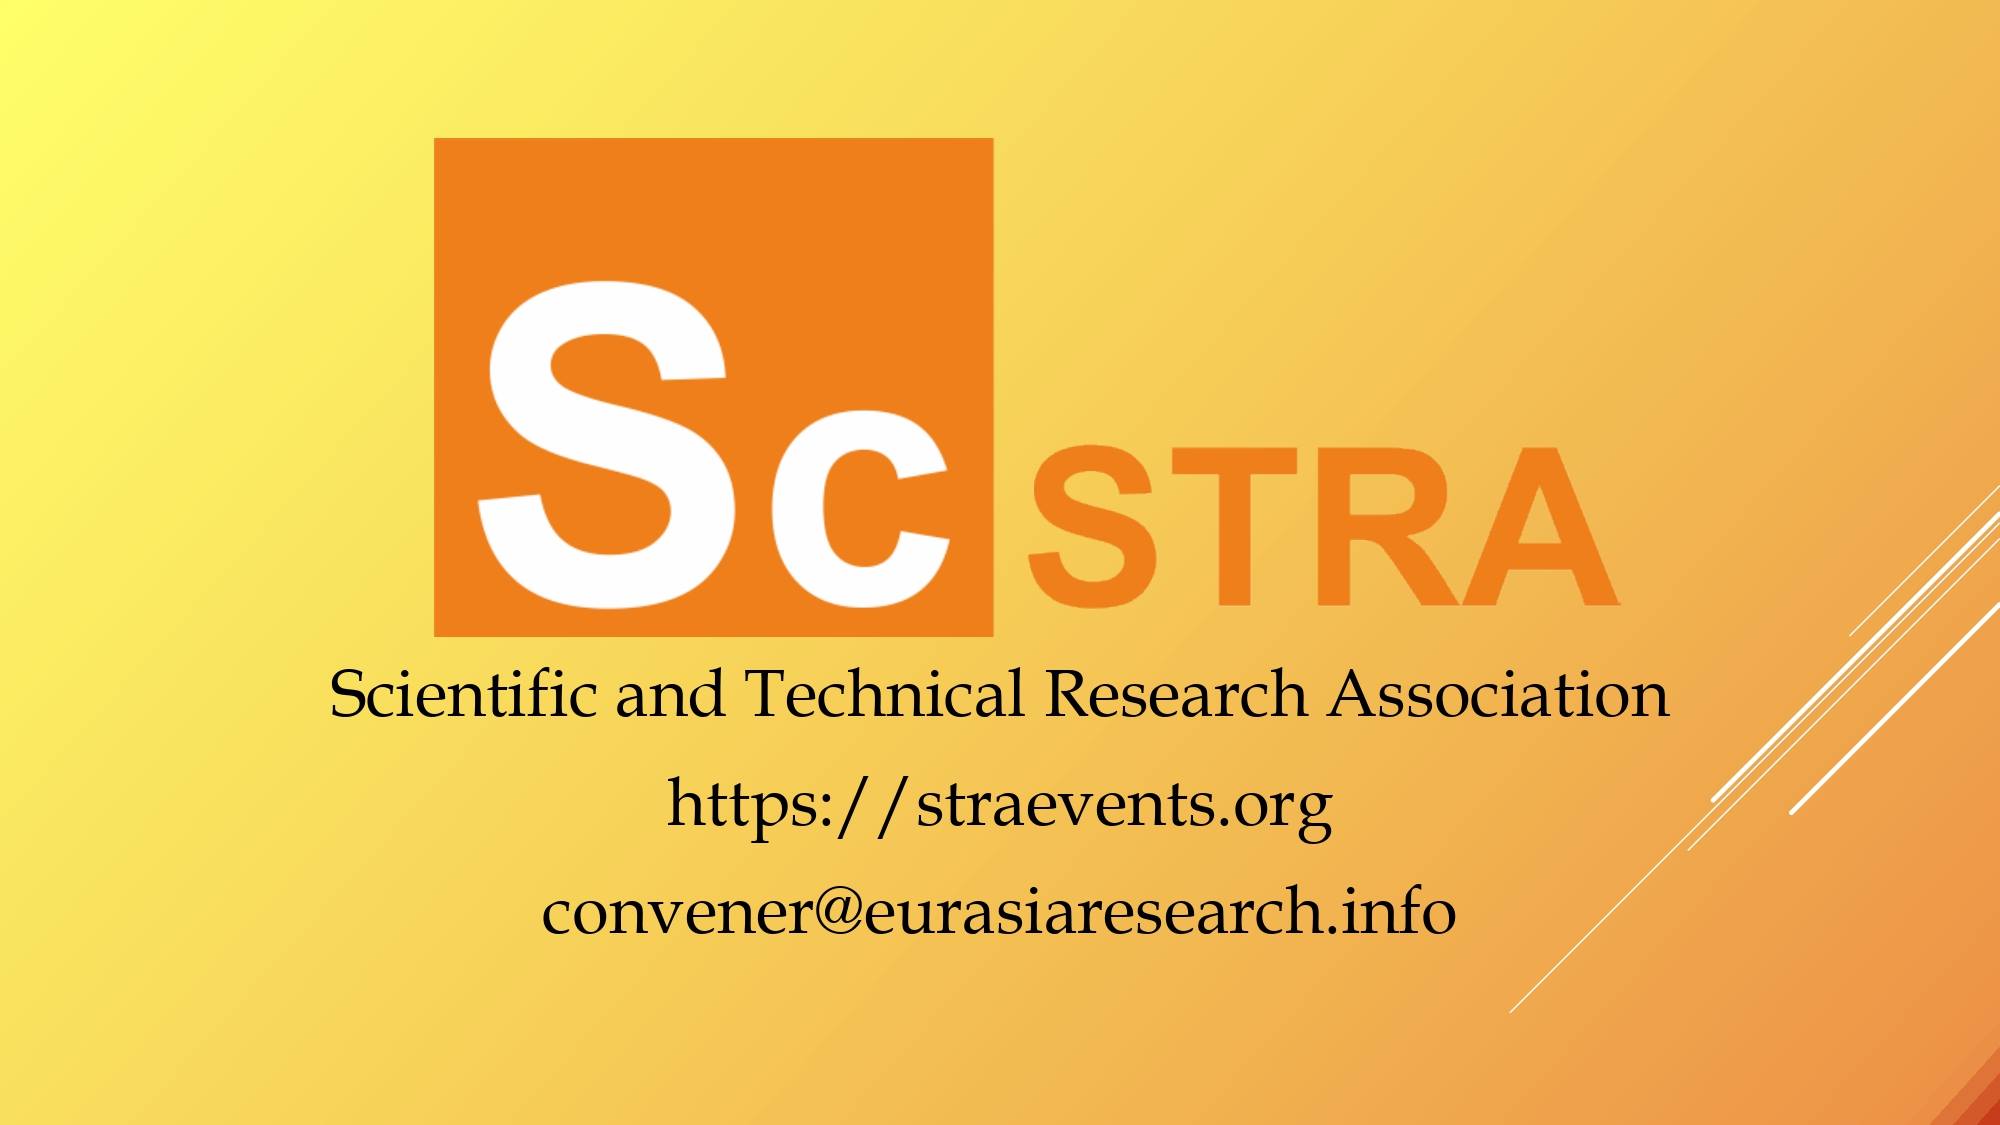 12th ICSTR Singapore – International Conference on Science & Technology Research, 17-18 November 2022